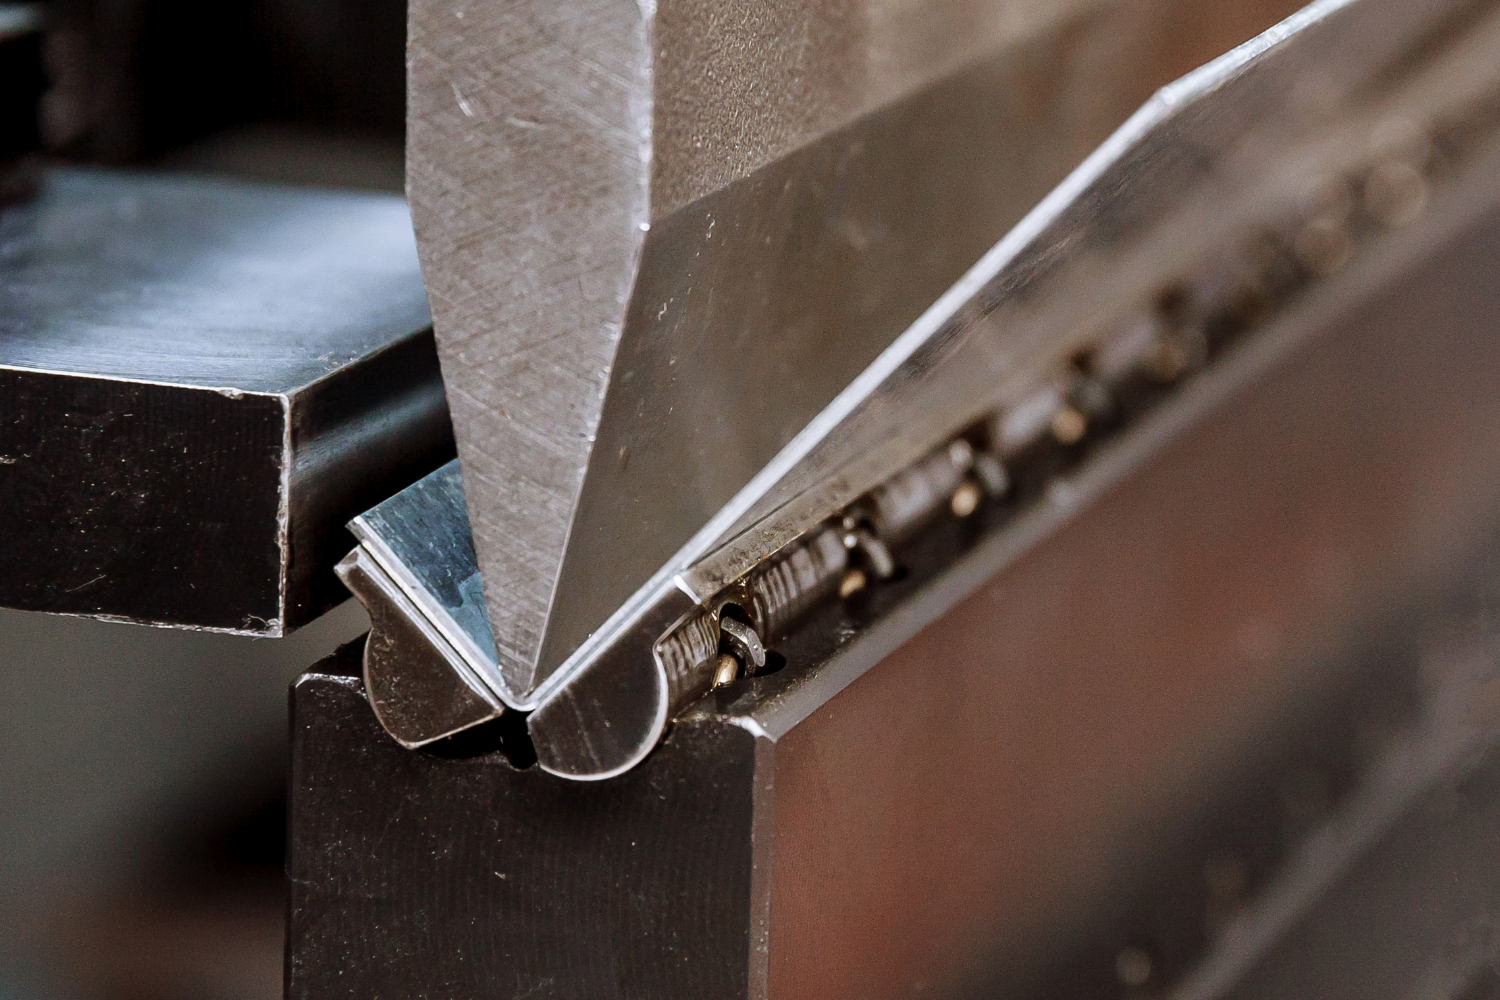 A sophisticated machine precisely bending and shaping steel, illustrating Dakota Steel and Trim, Inc.'s advanced technology and skilled craftsmanship in slitting, bending, and rollforming.